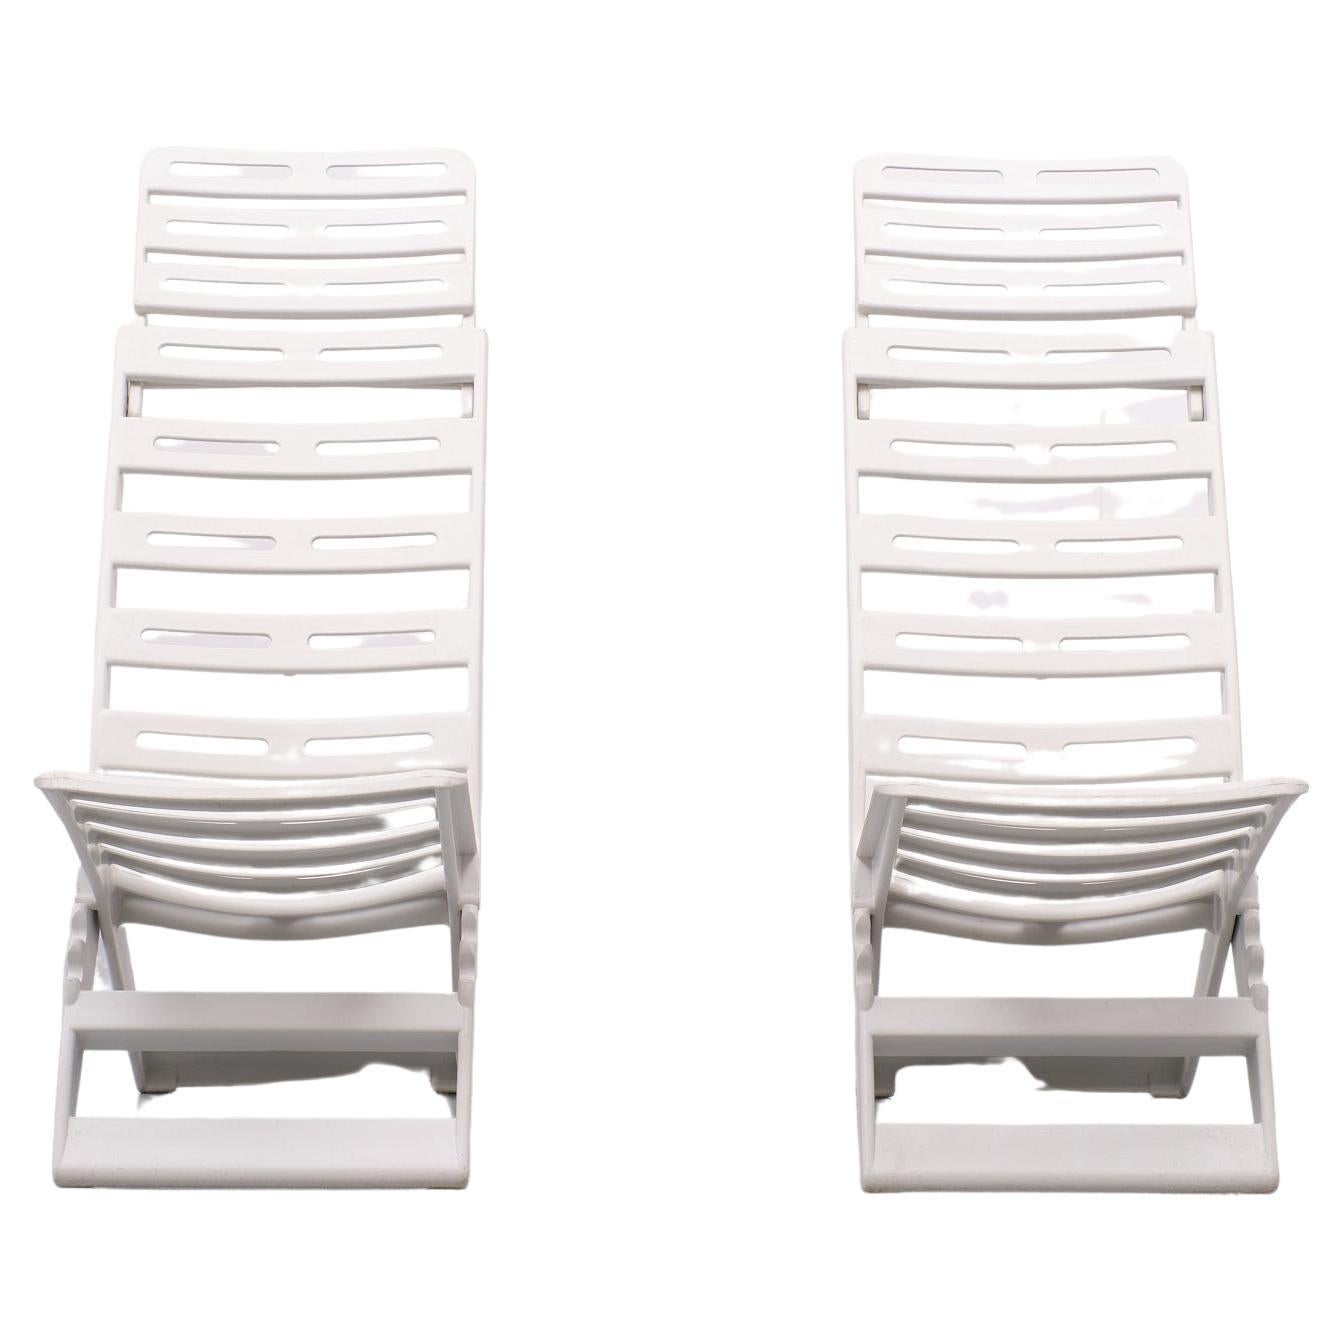 Two plastic folding design chairs (type Maratea) produced by the Italian manufacturer Fanini Fain (Ascoli Piceno).
Suitable for indoor and outdoor use, for garden and tent.
Elegant, practical, comfortable, very strong, easy to carry and weather